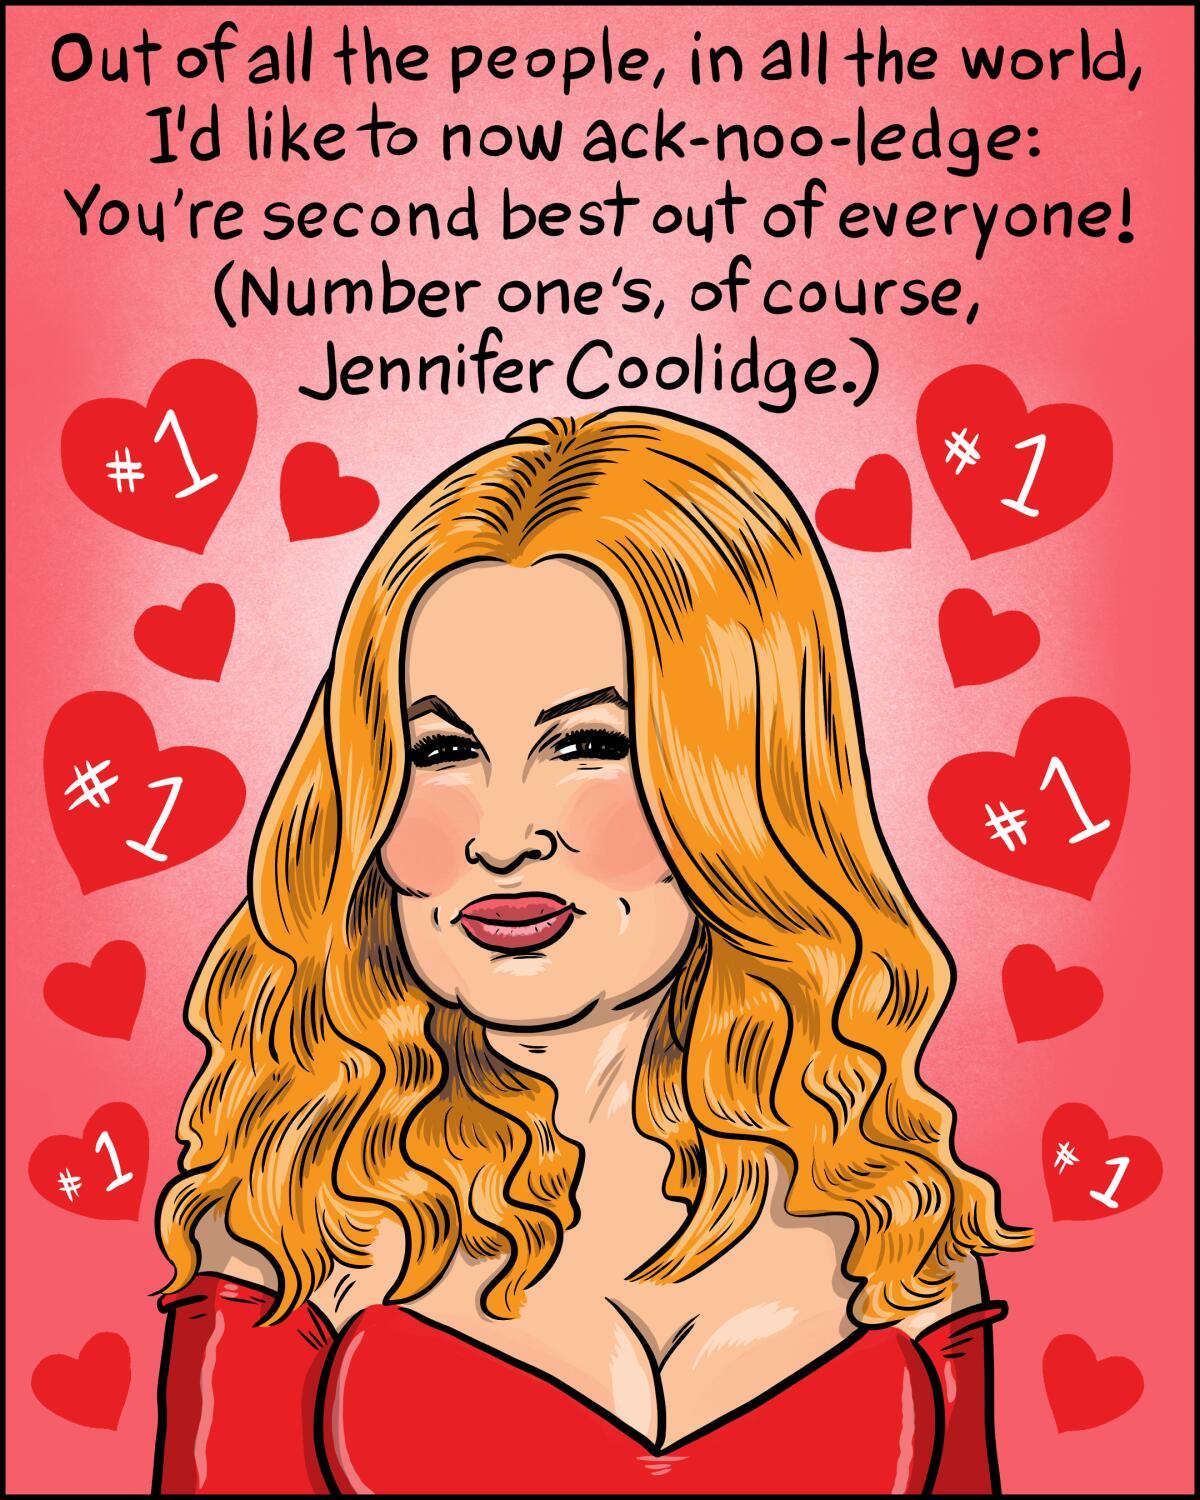 Out of all people in all the world, I'd like to ack-noo-ledge: You're 2nd best out of everyone! Number 1's Jennifer Coolidge